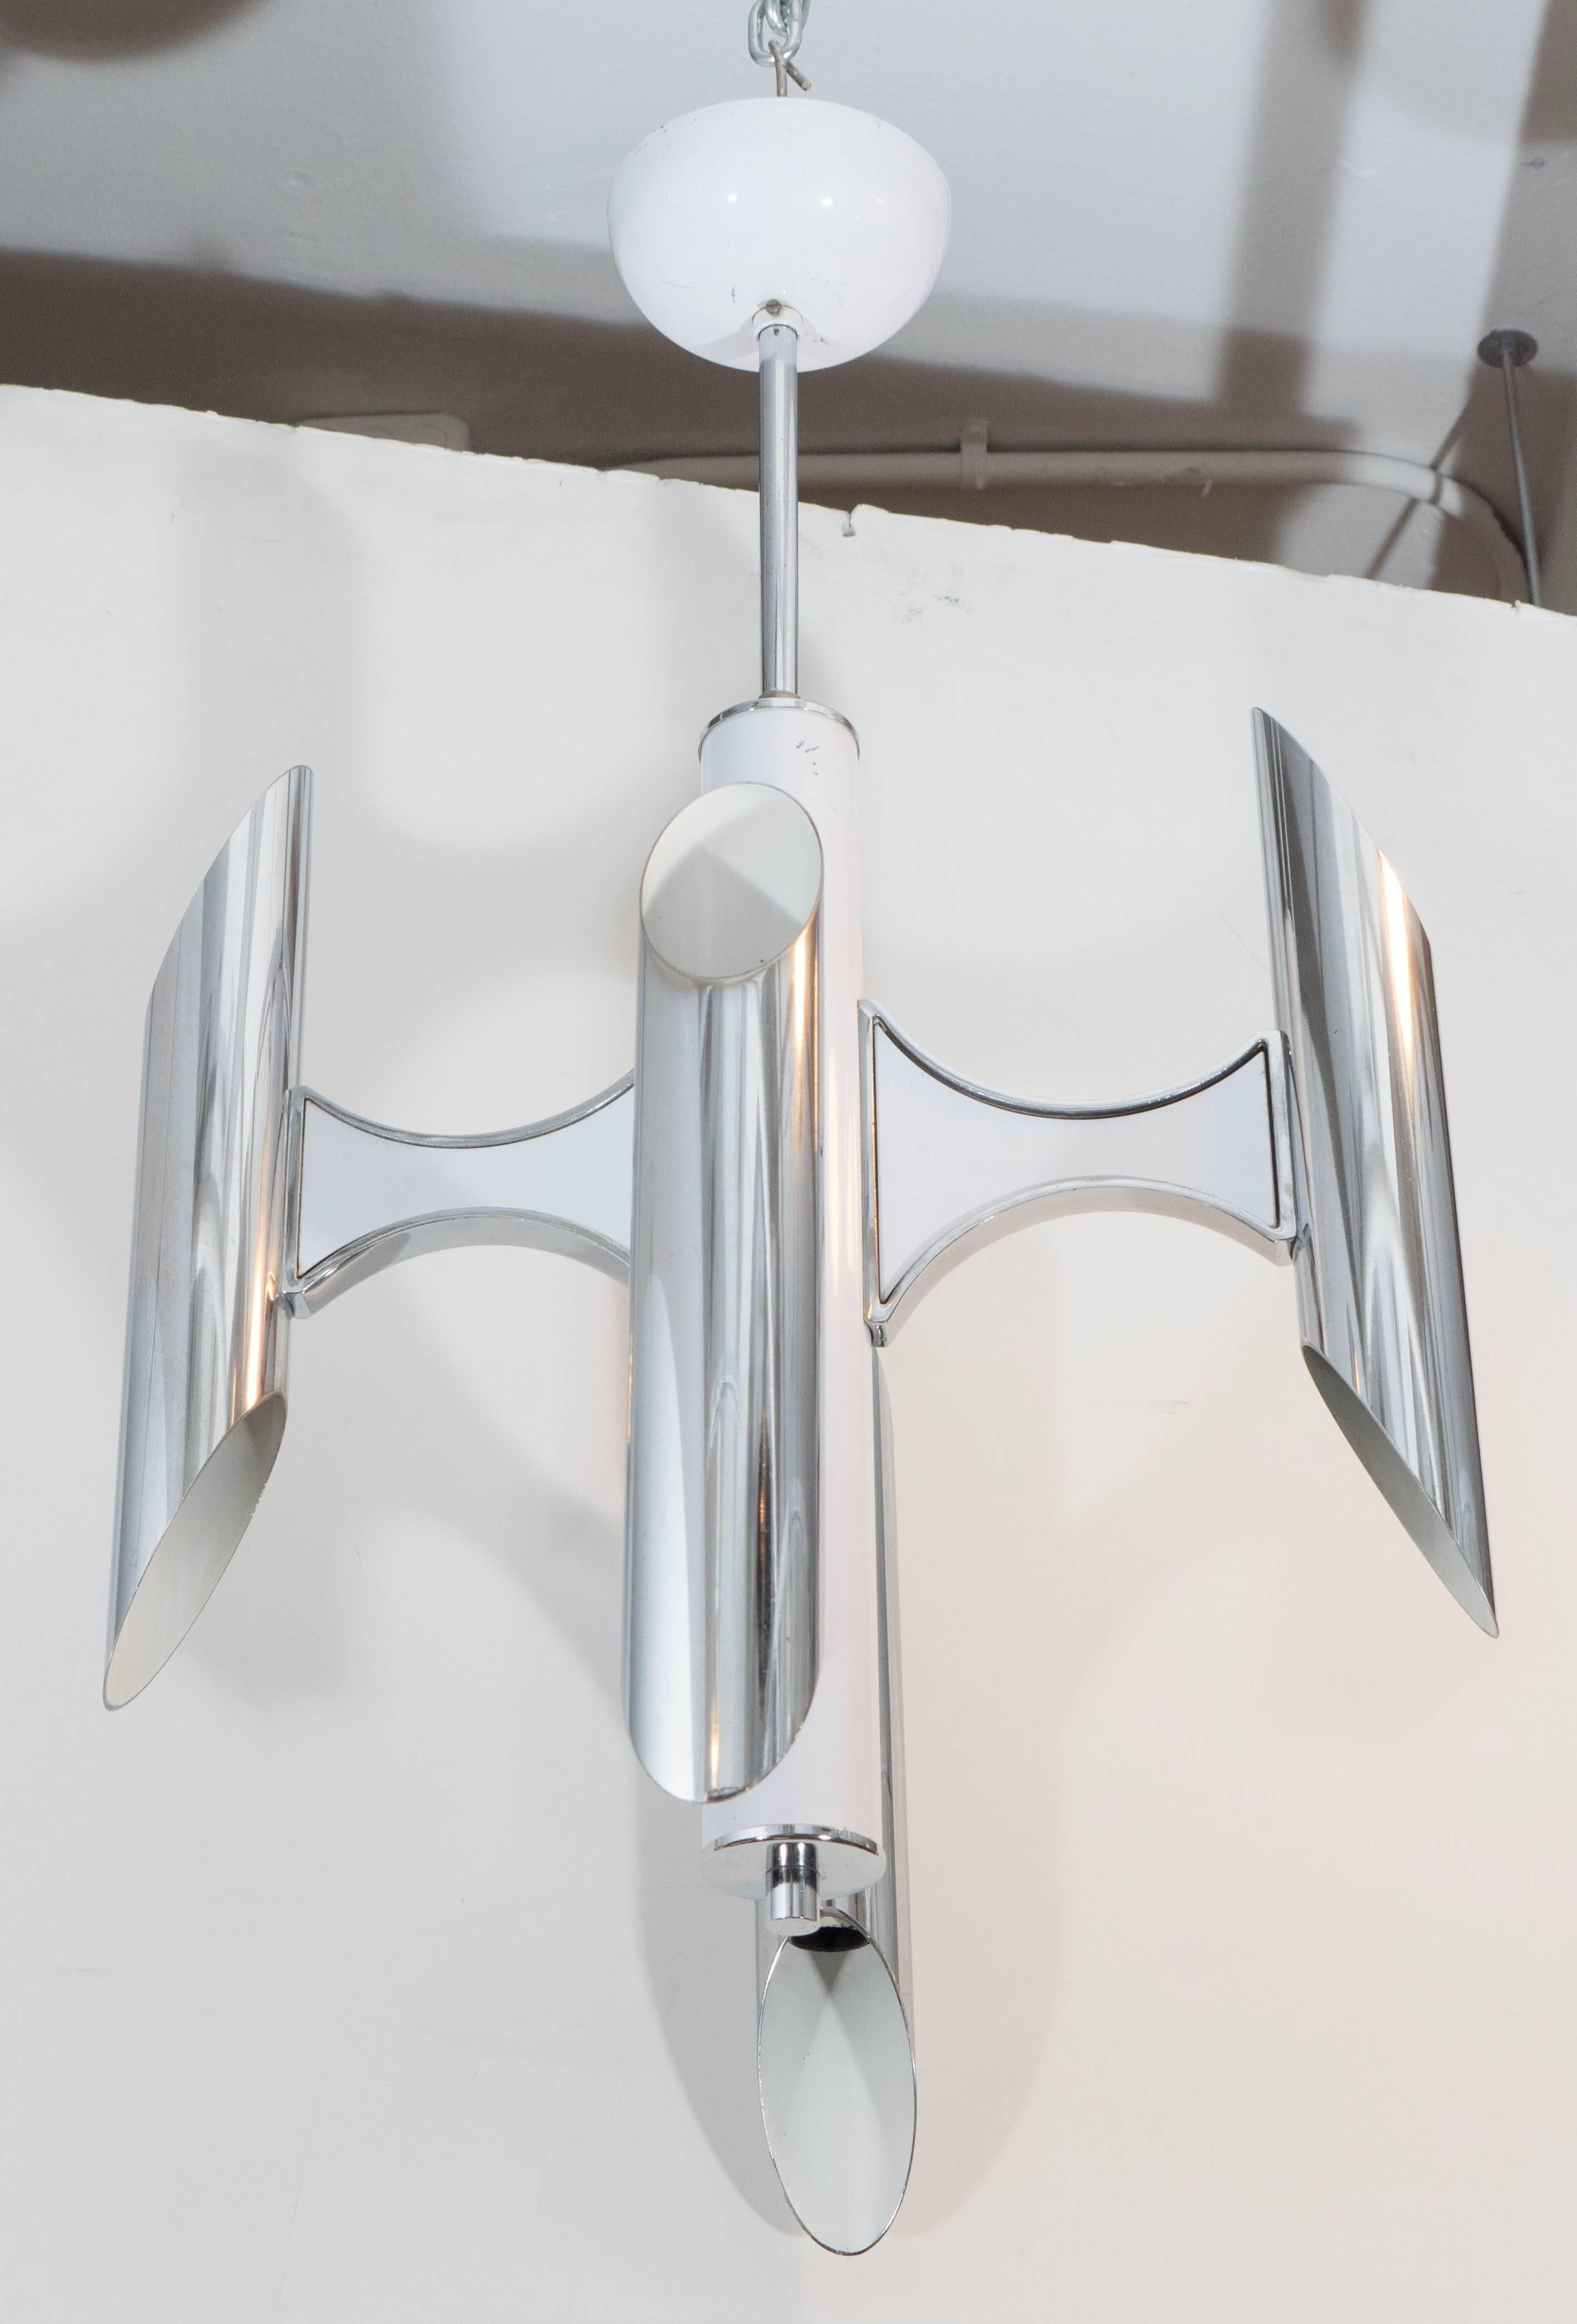 A vintage Italian chandelier in chrome and white enamel, designed in the highly modern style by Gaetano Sciolari, circa 1960s, including four buttress arms, each supporting a two-light tubular socket cover, affixed to a central cylindrical nucleus